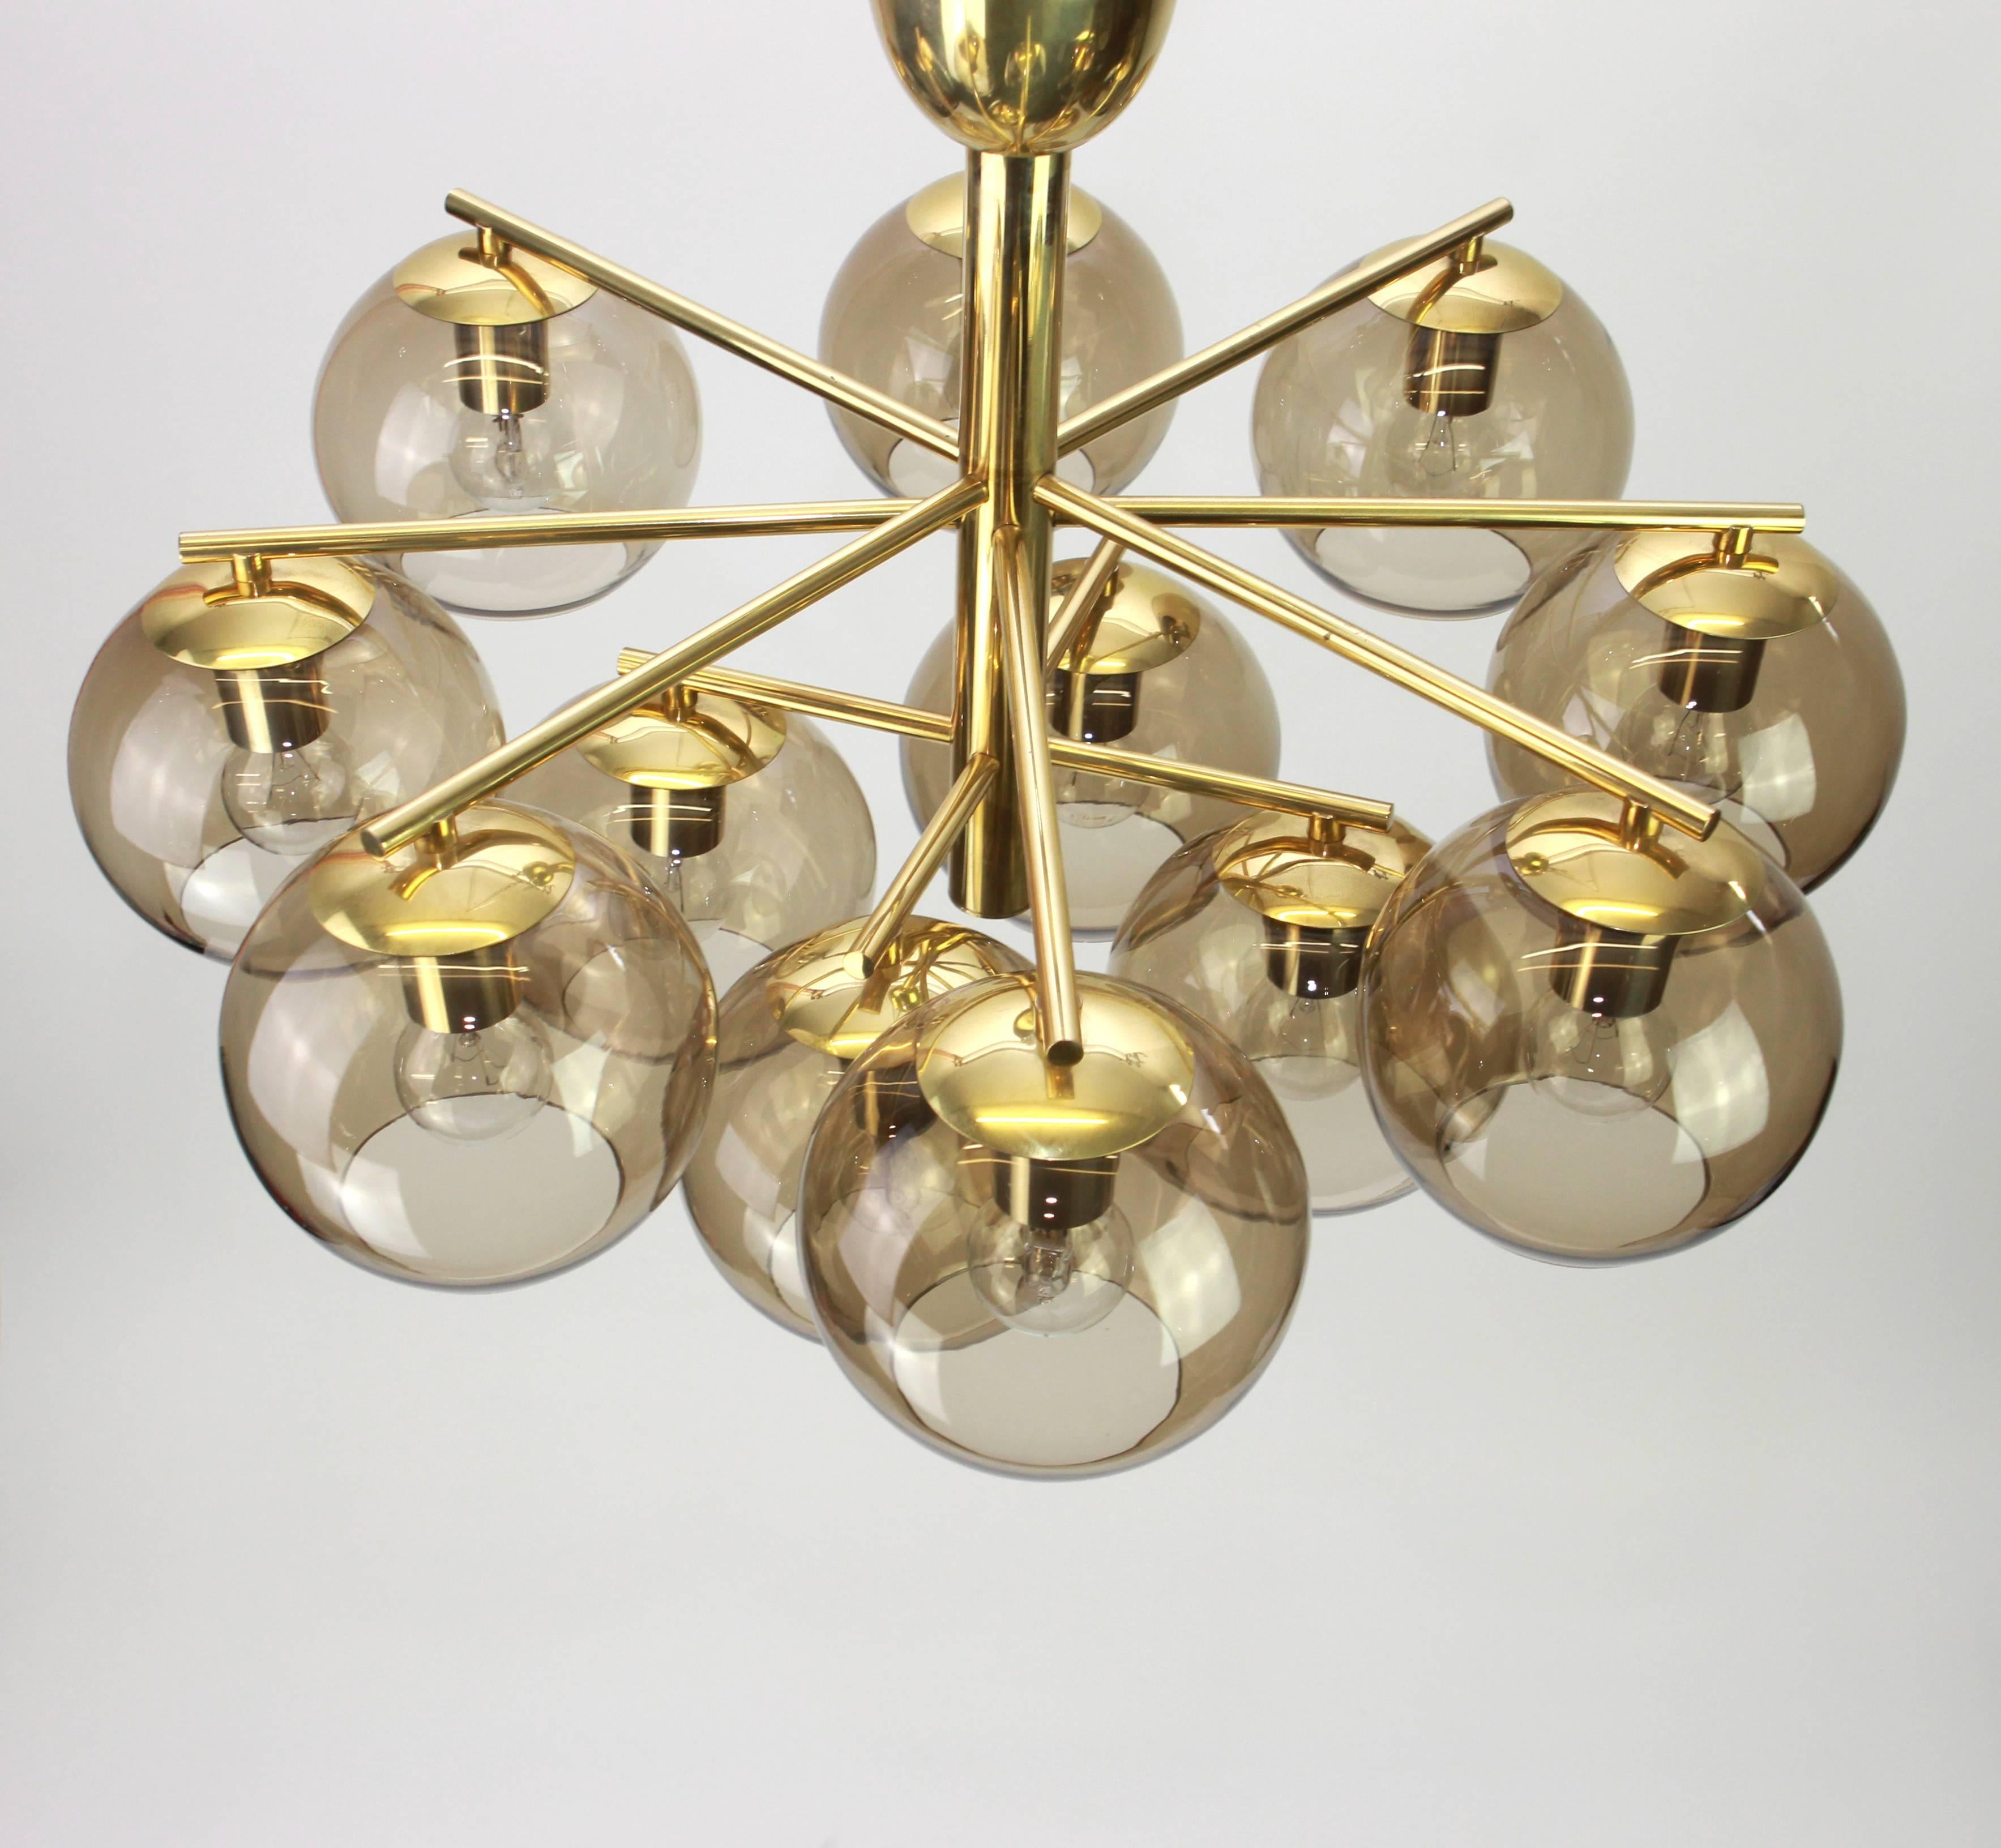 Twelve-light brass chandelier in the style of Hans-Agne Jakobsson.
Smoked glass in a very beautiful smokey brown color.
Made with brass and brass-plated metal, best of the 1960s.

High quality and in very good condition. Cleaned, well-wired and